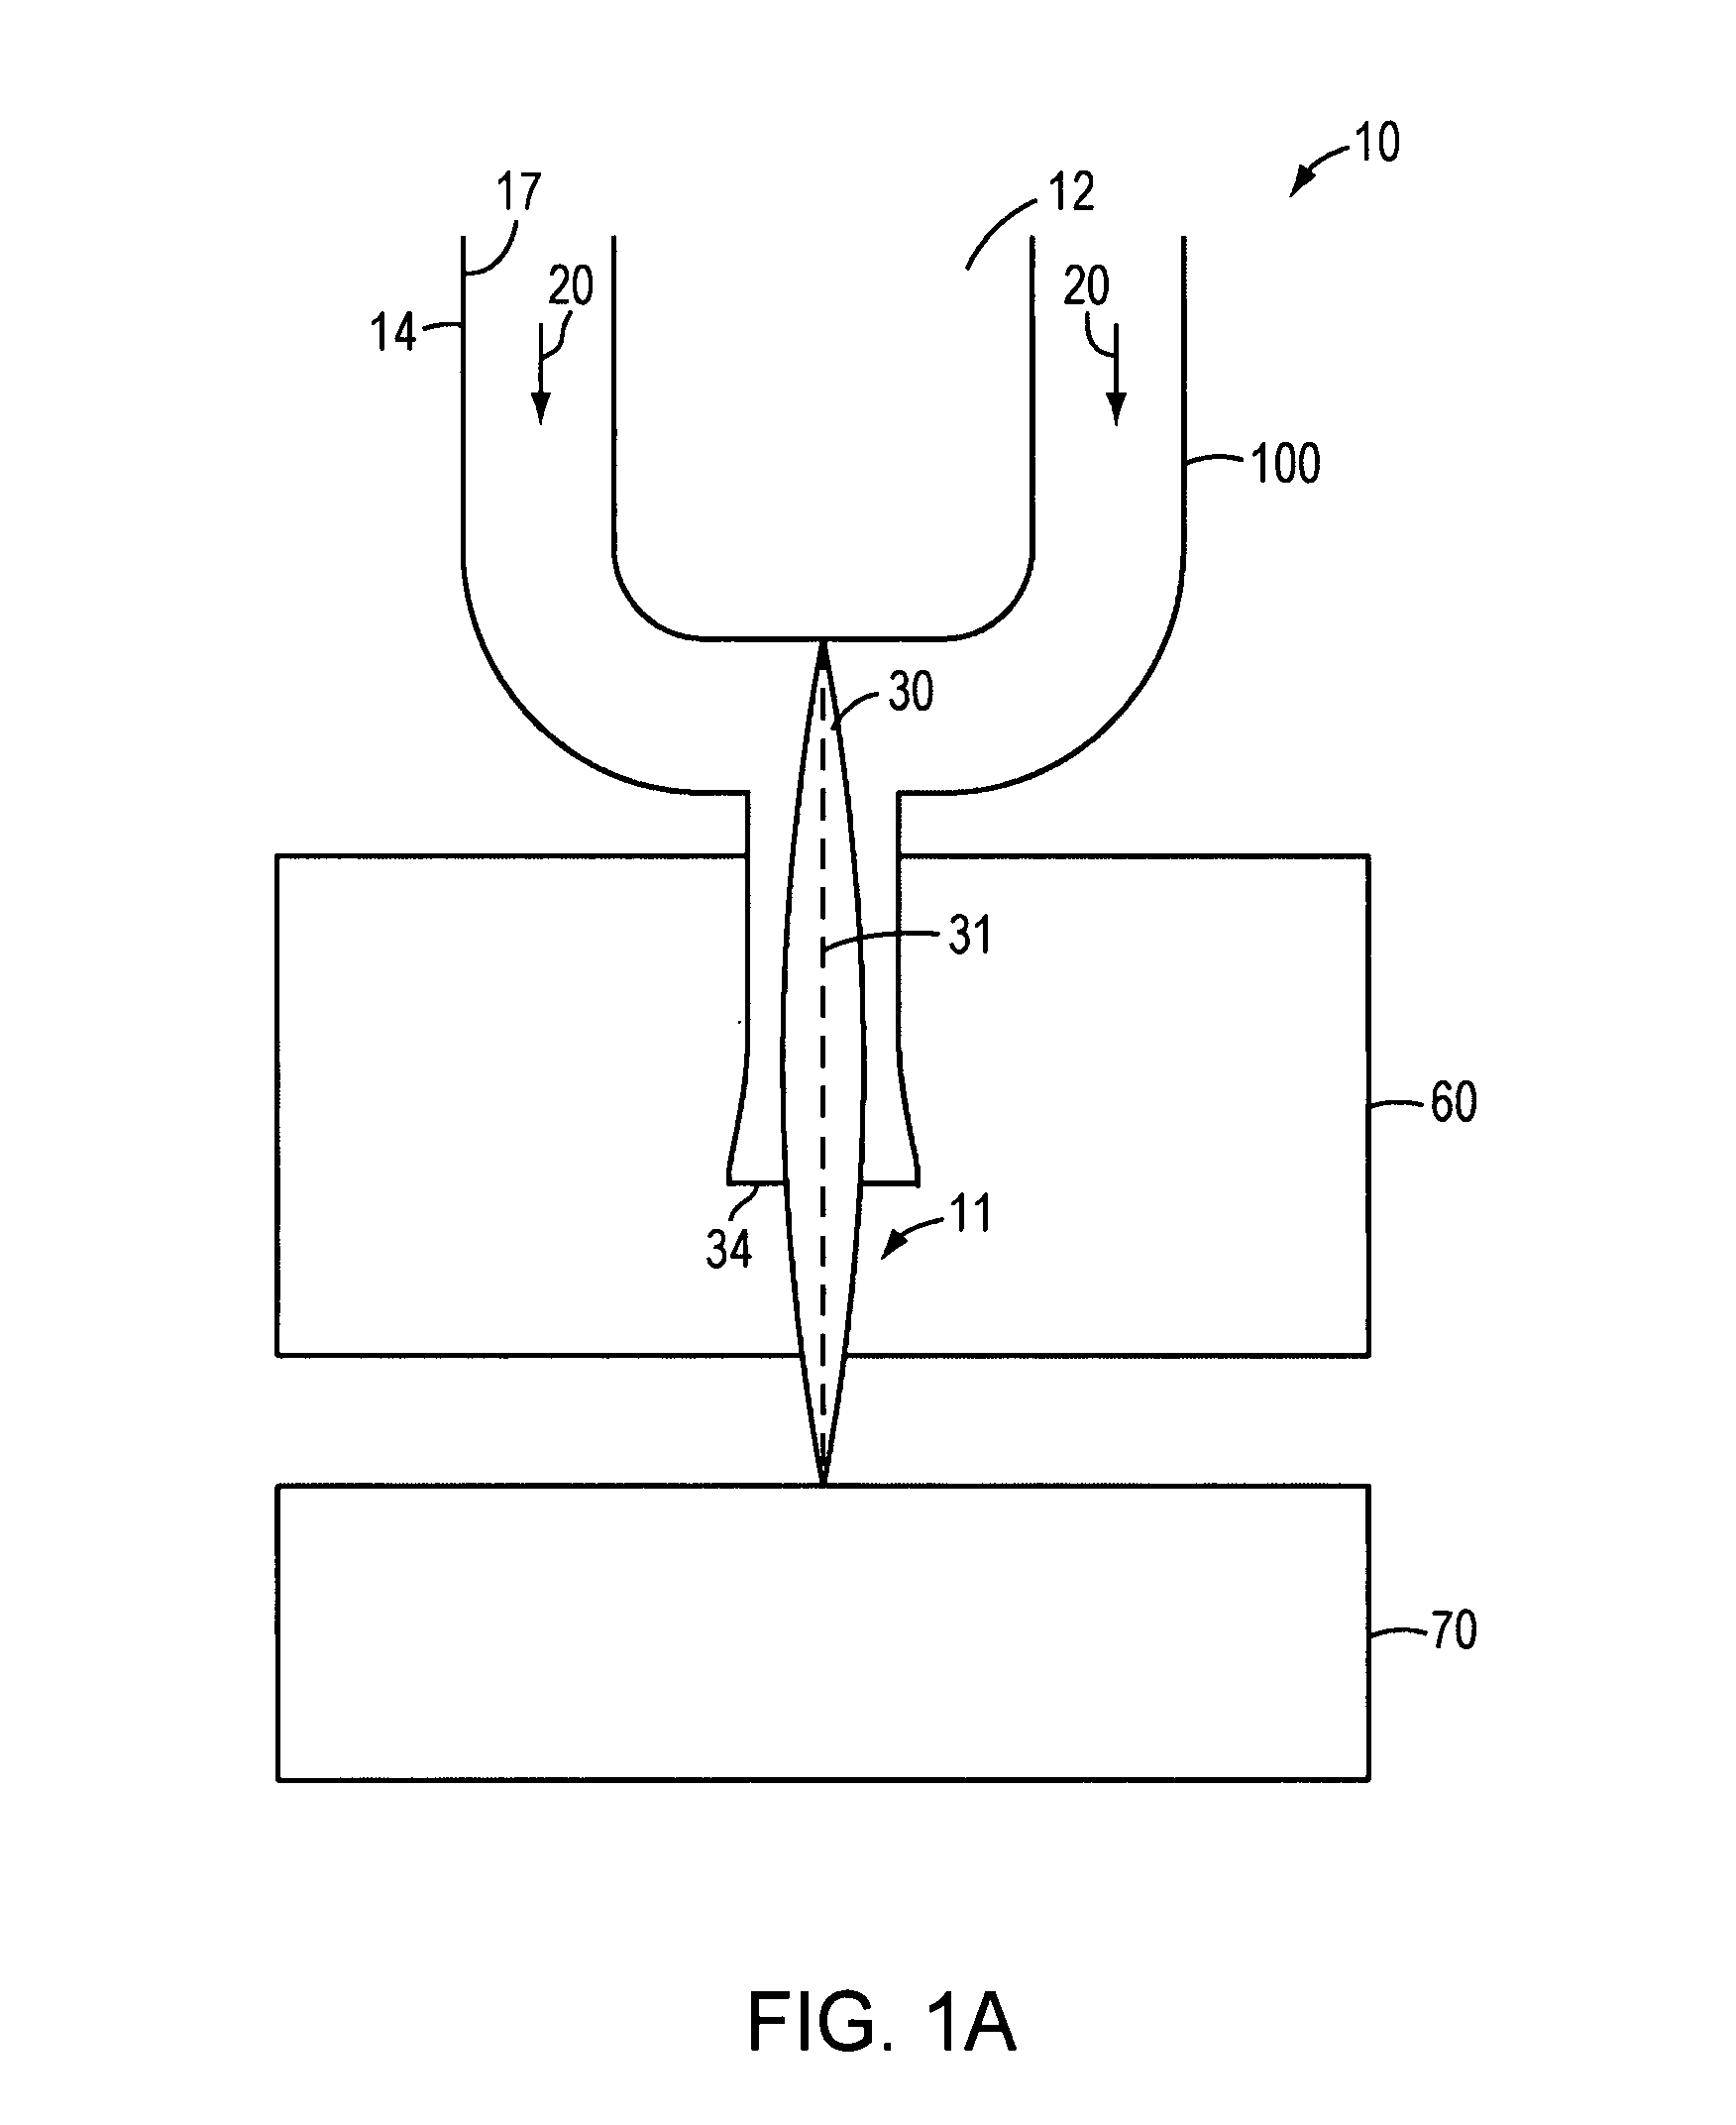 Method and apparatus for improved plasma arc torch cut quality